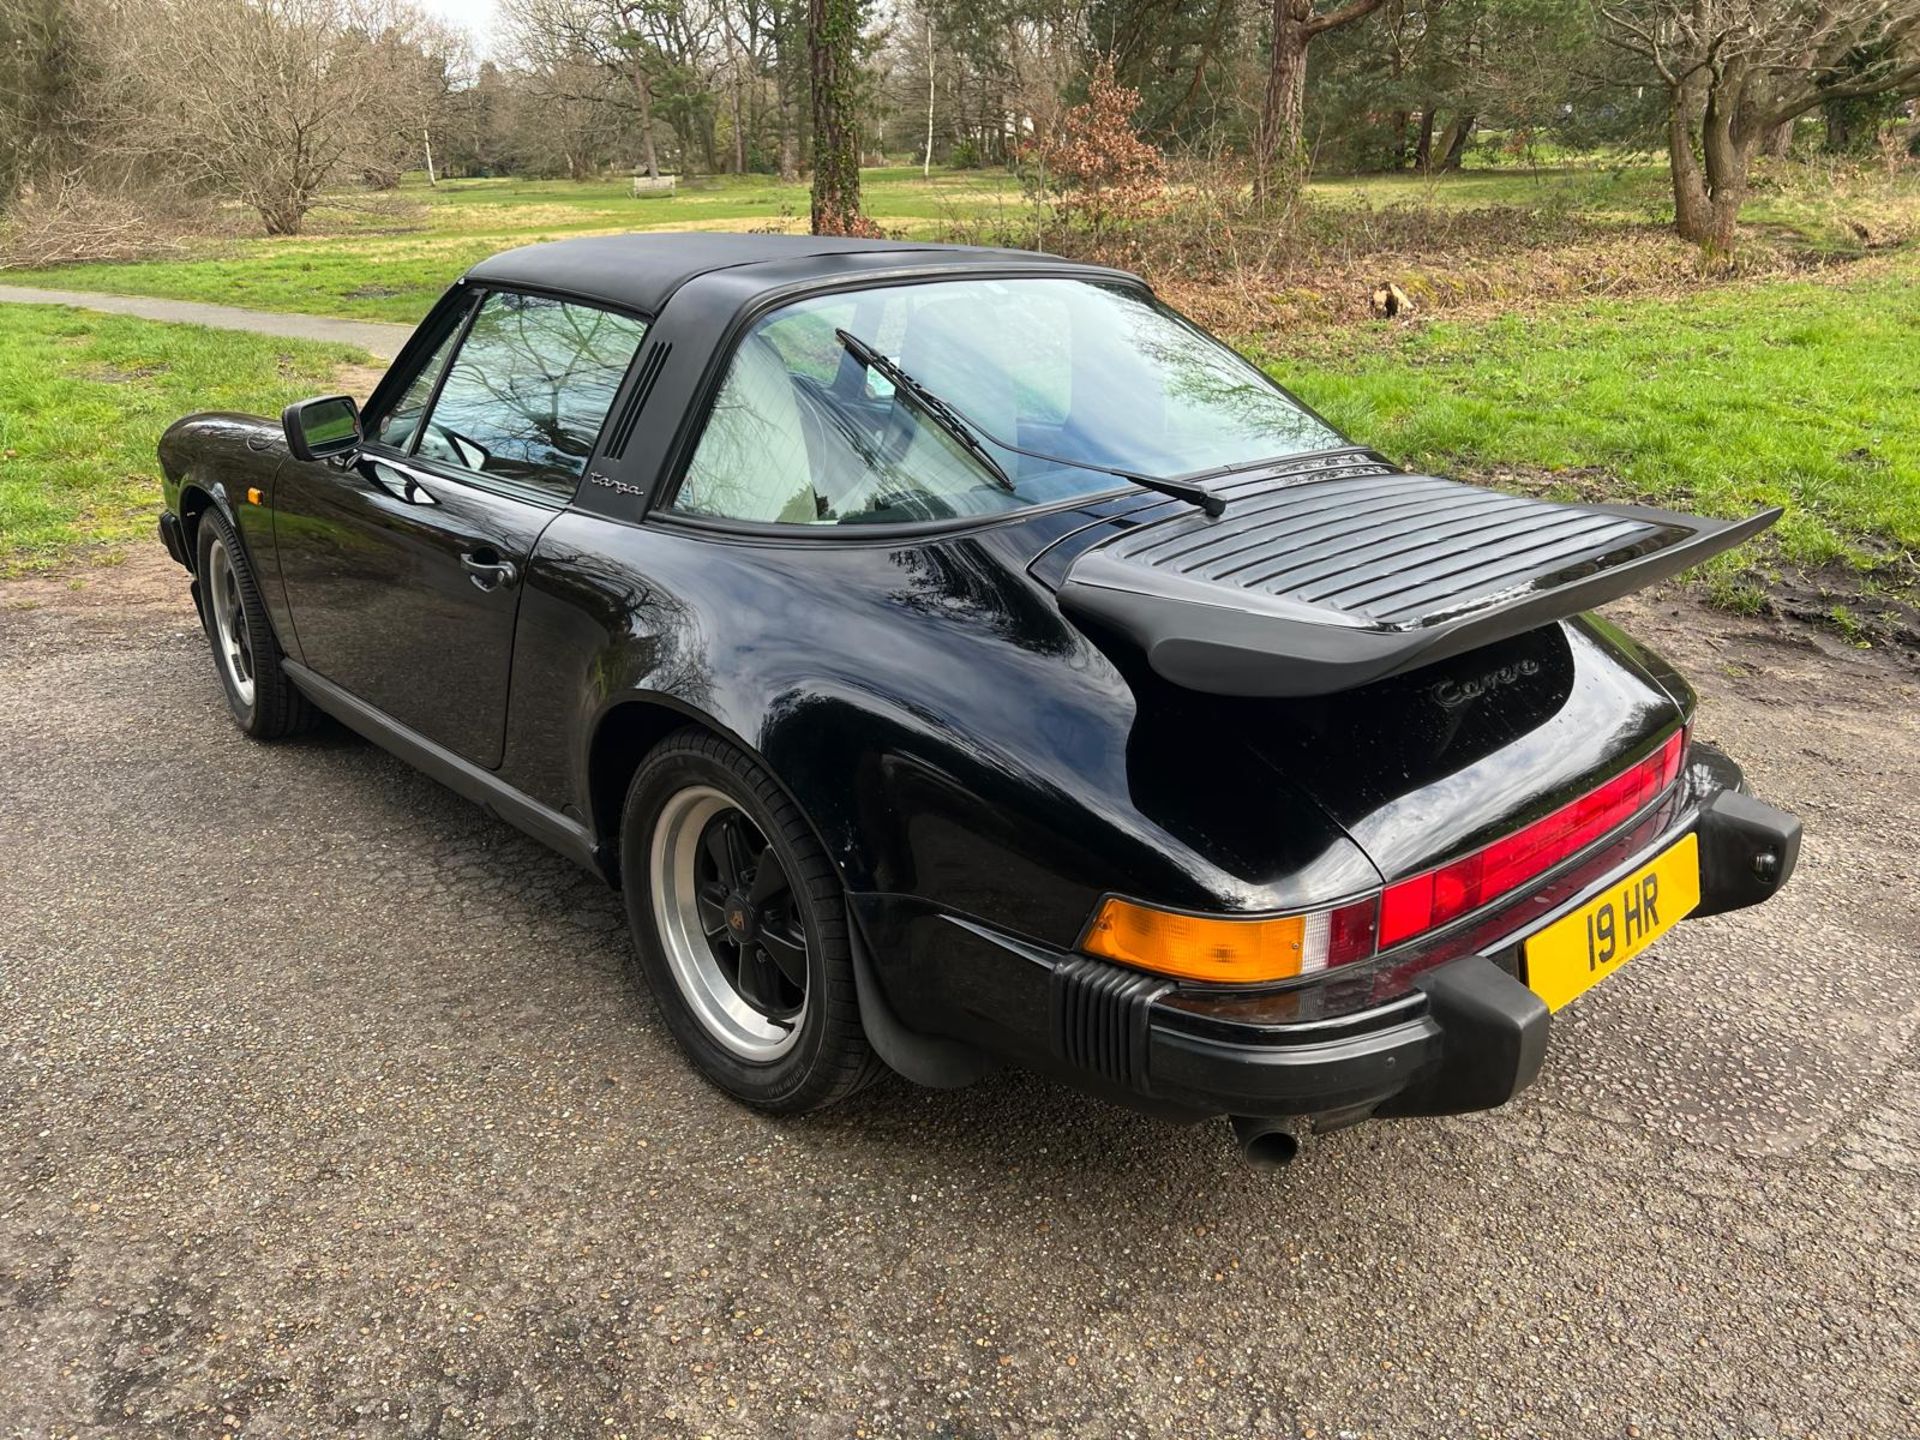 1988 Porsche Carrera Targa 3.2 - 27 yrs ownership, 61,000 miles with only 3500 miles in last 25 yrs - Image 11 of 18